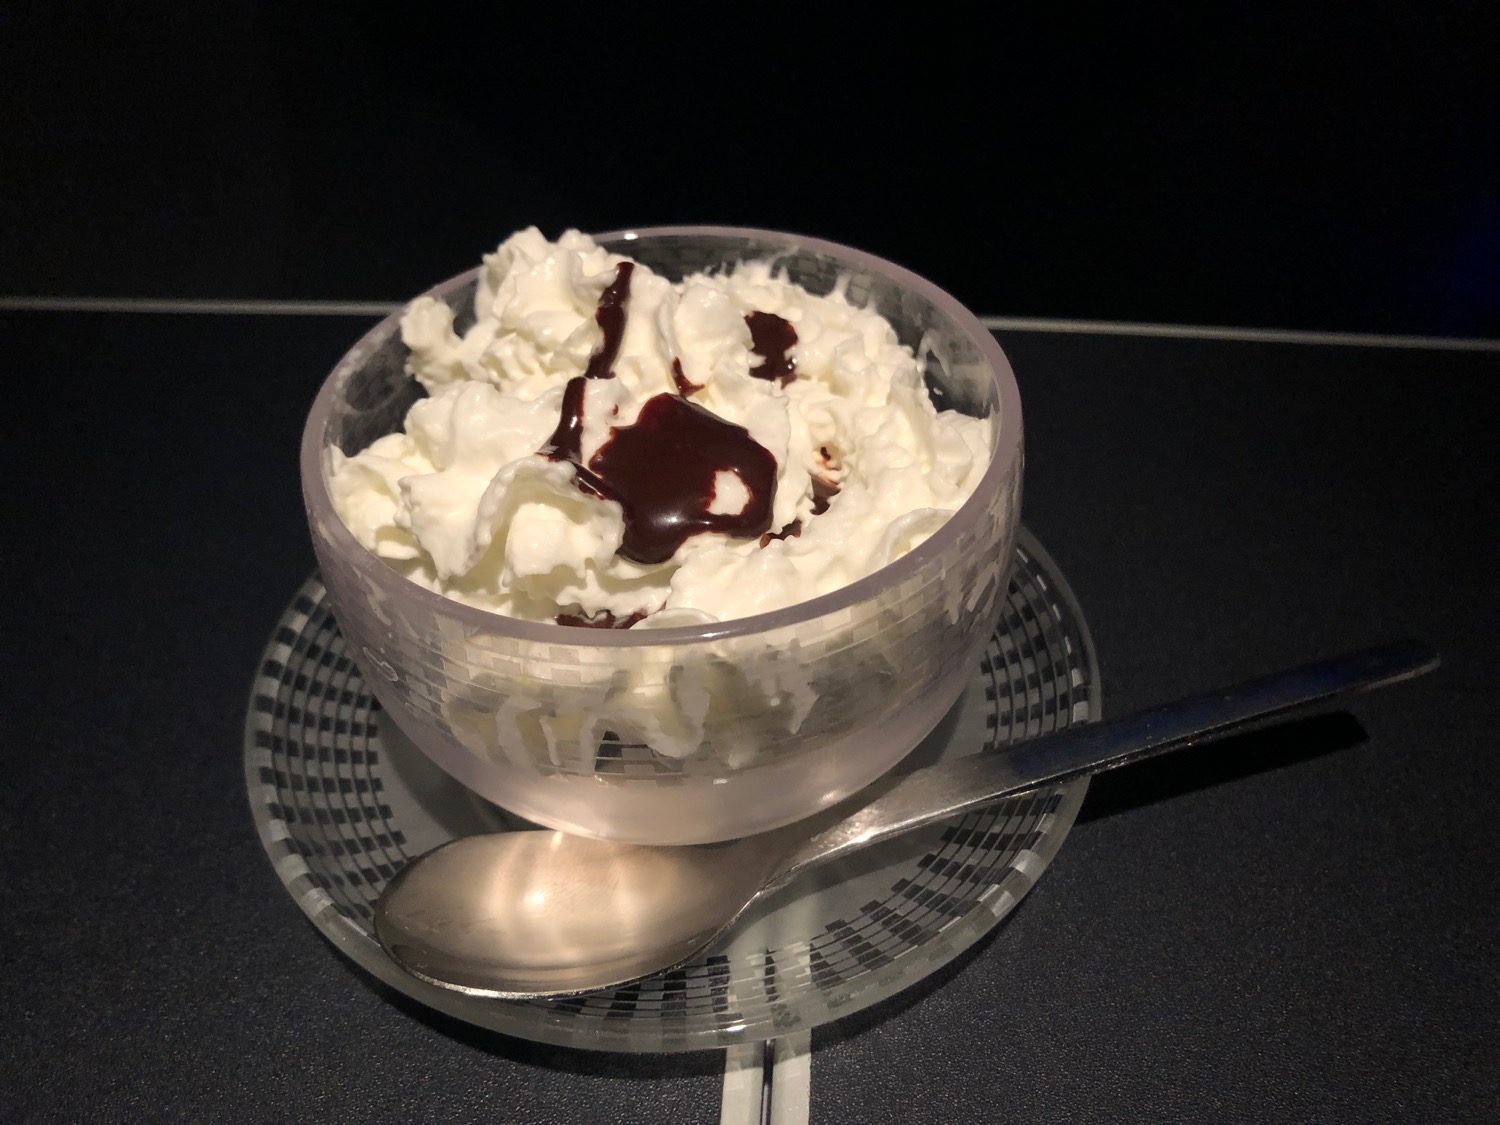 a bowl of whipped cream and chocolate syrup